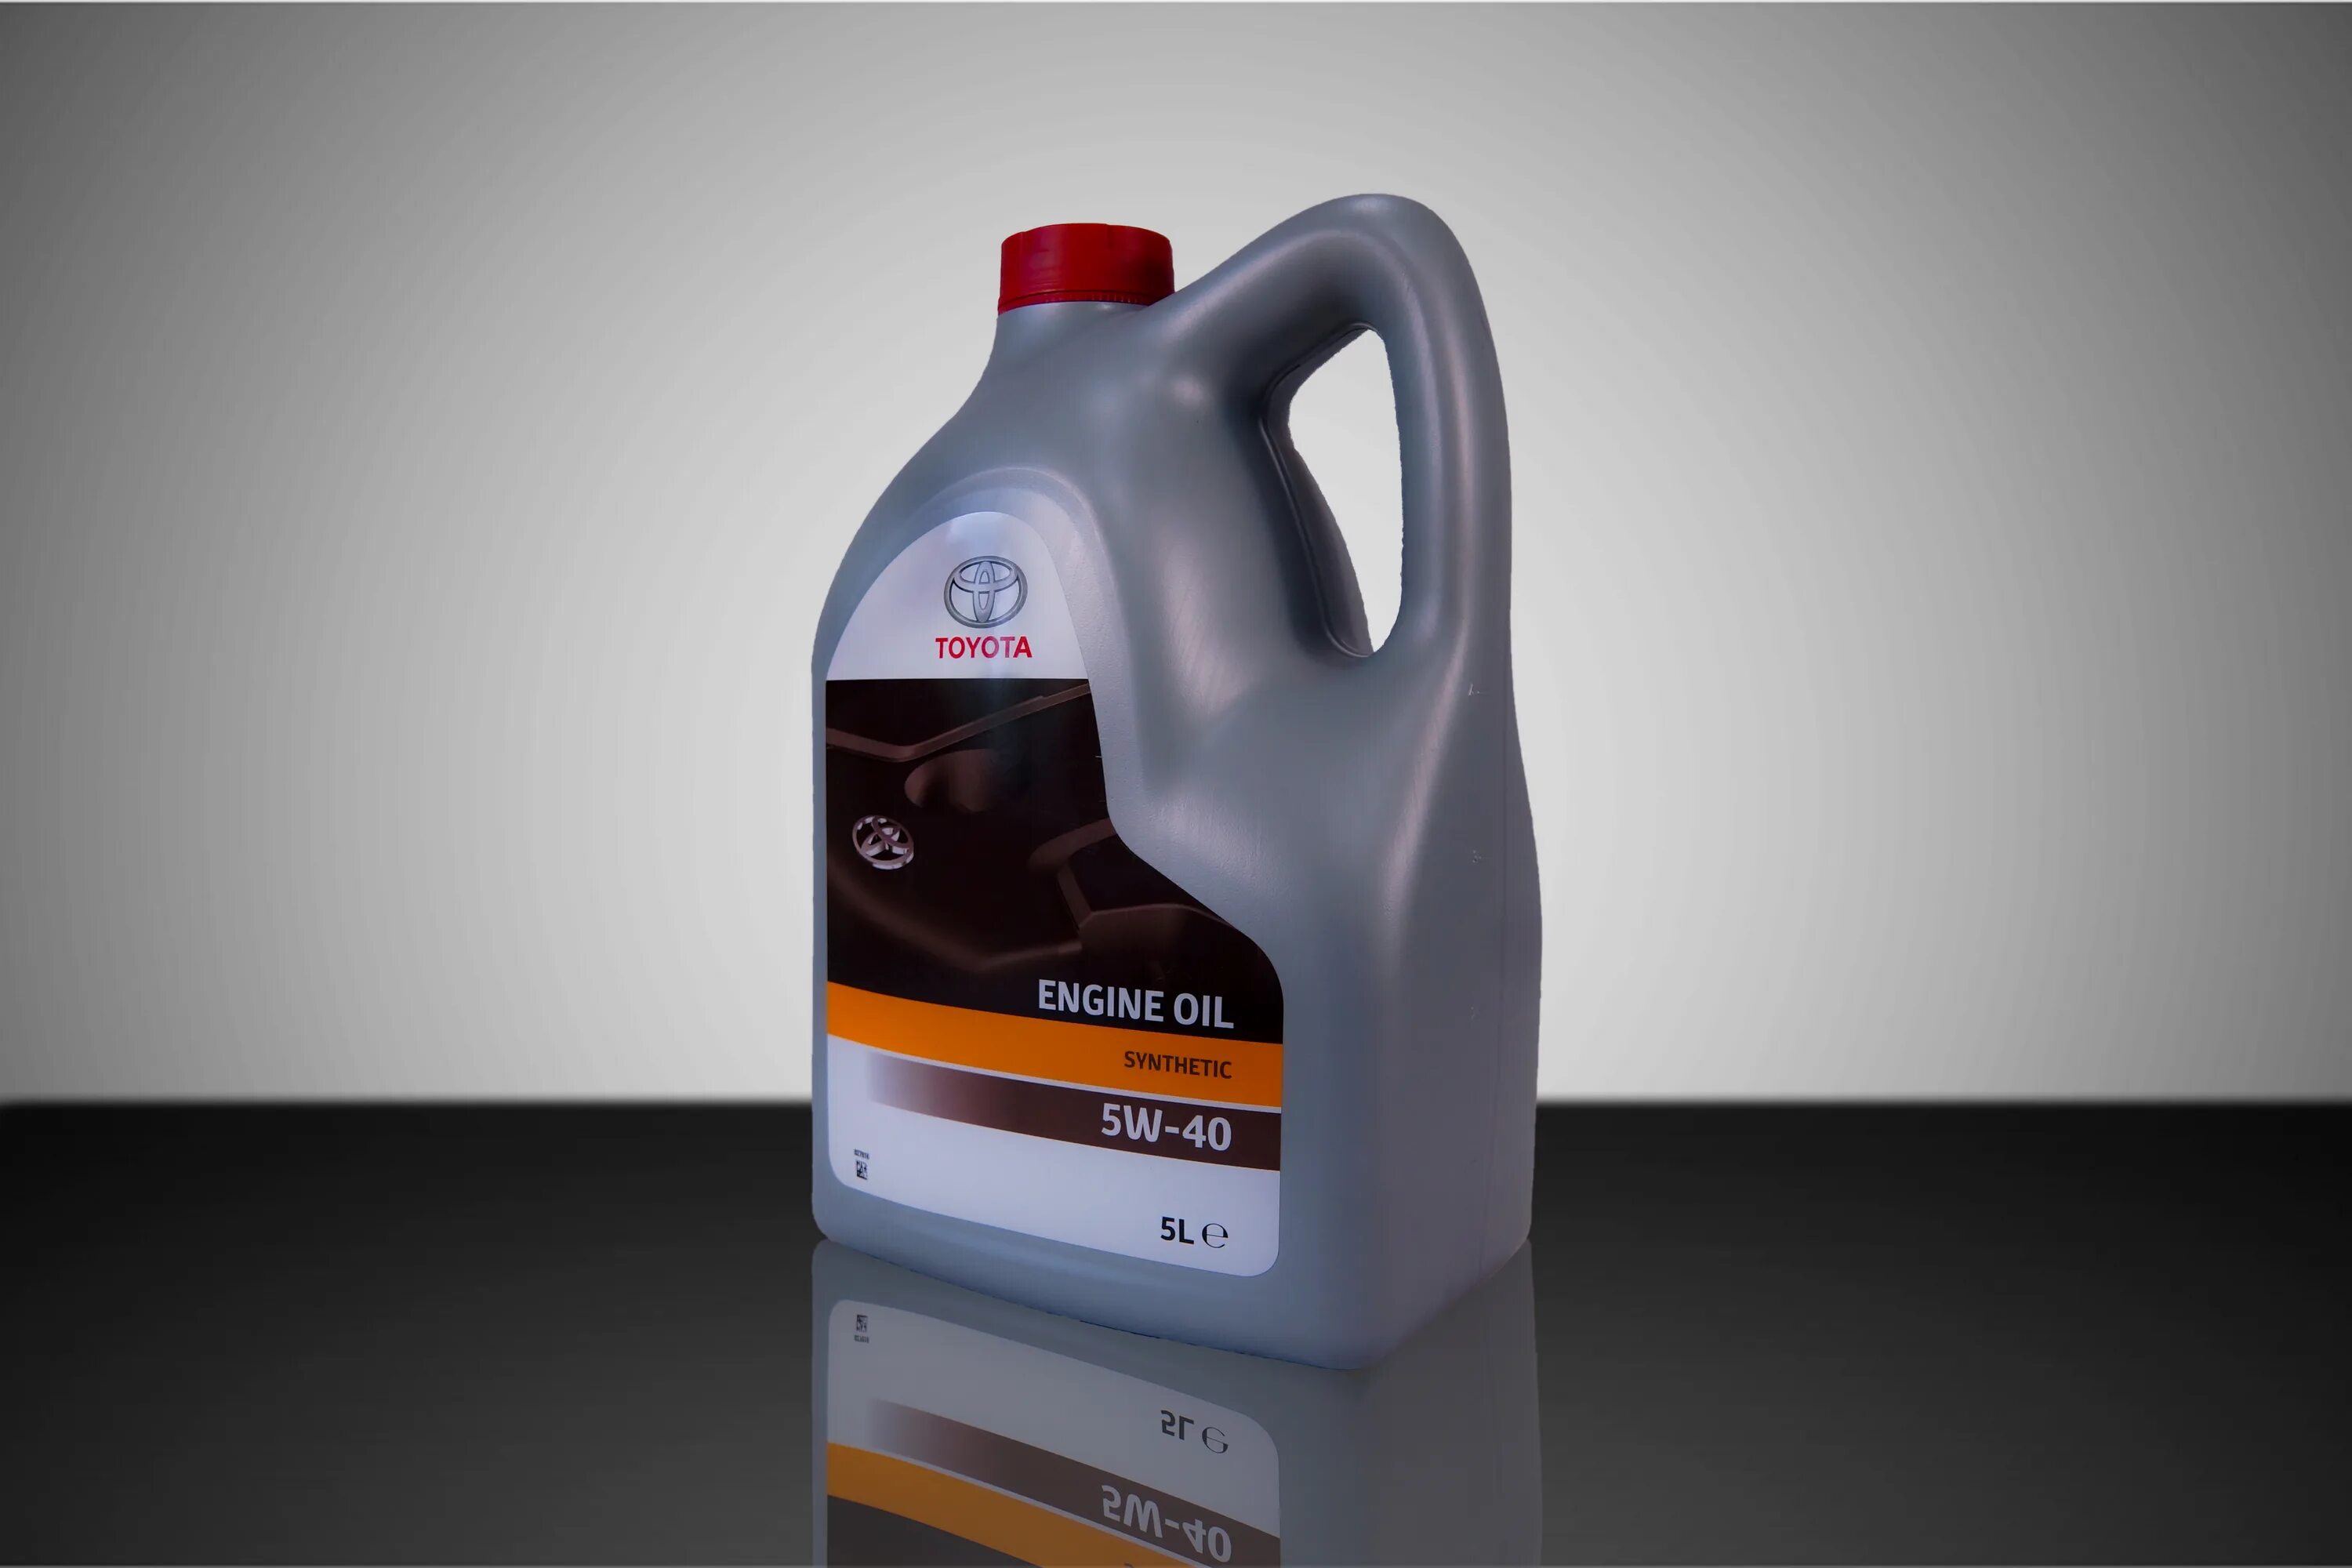 Toyota engine Oil 5w-40. 0888080375go масло моторное. Toyota engine Oil Synthetic 5w-40. Toyota 0888080375go.